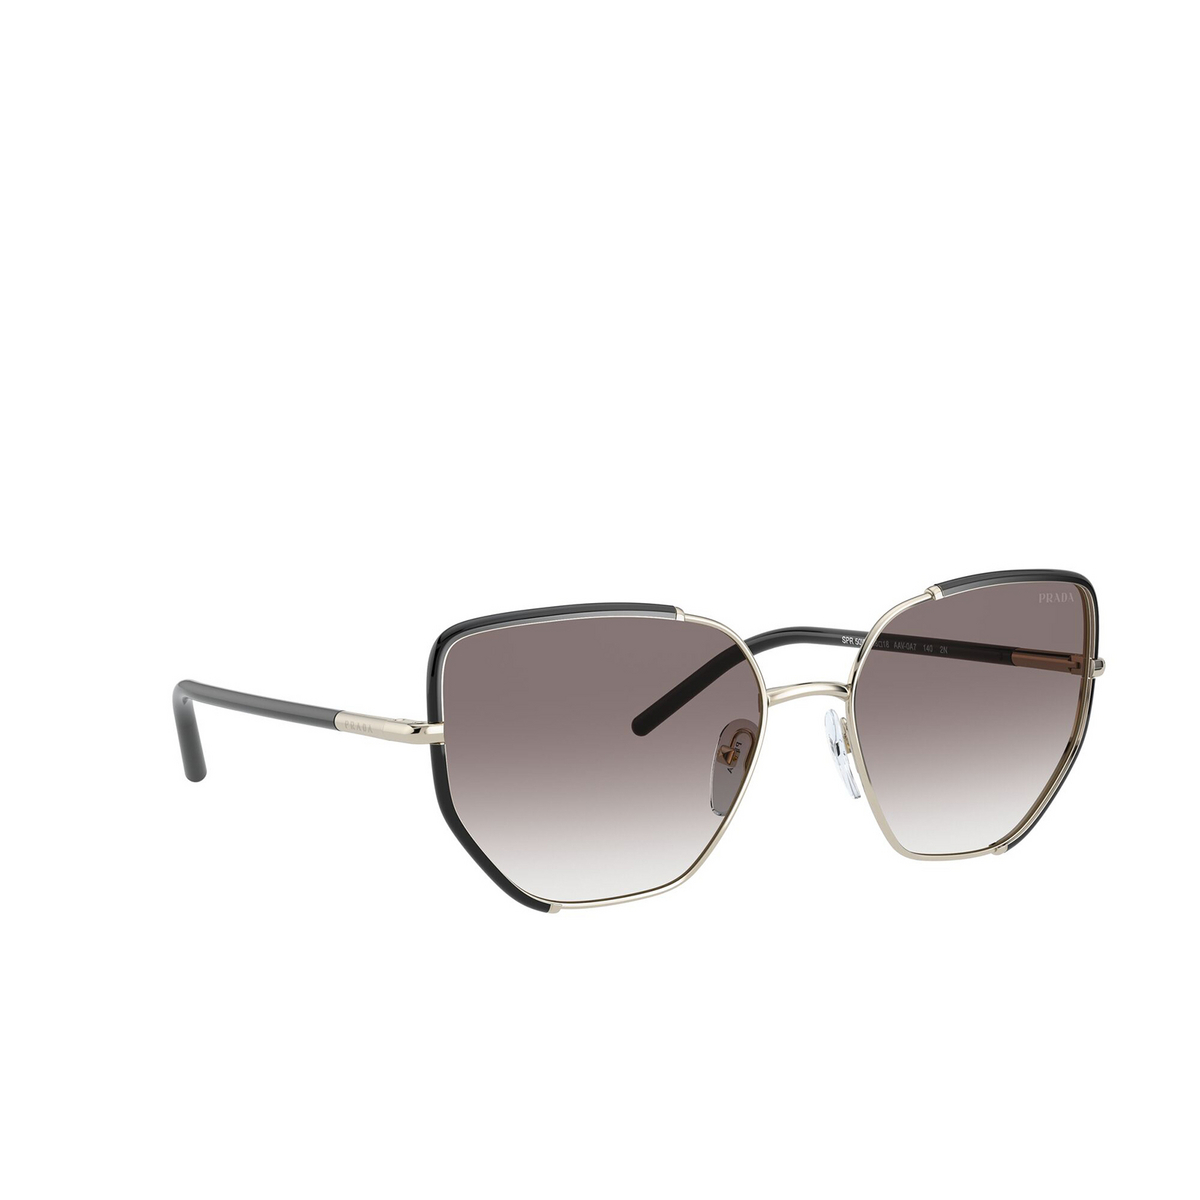 Prada® Butterfly Sunglasses: PR 50WS color Black / Pale Gold AAV0A7 - three-quarters view.